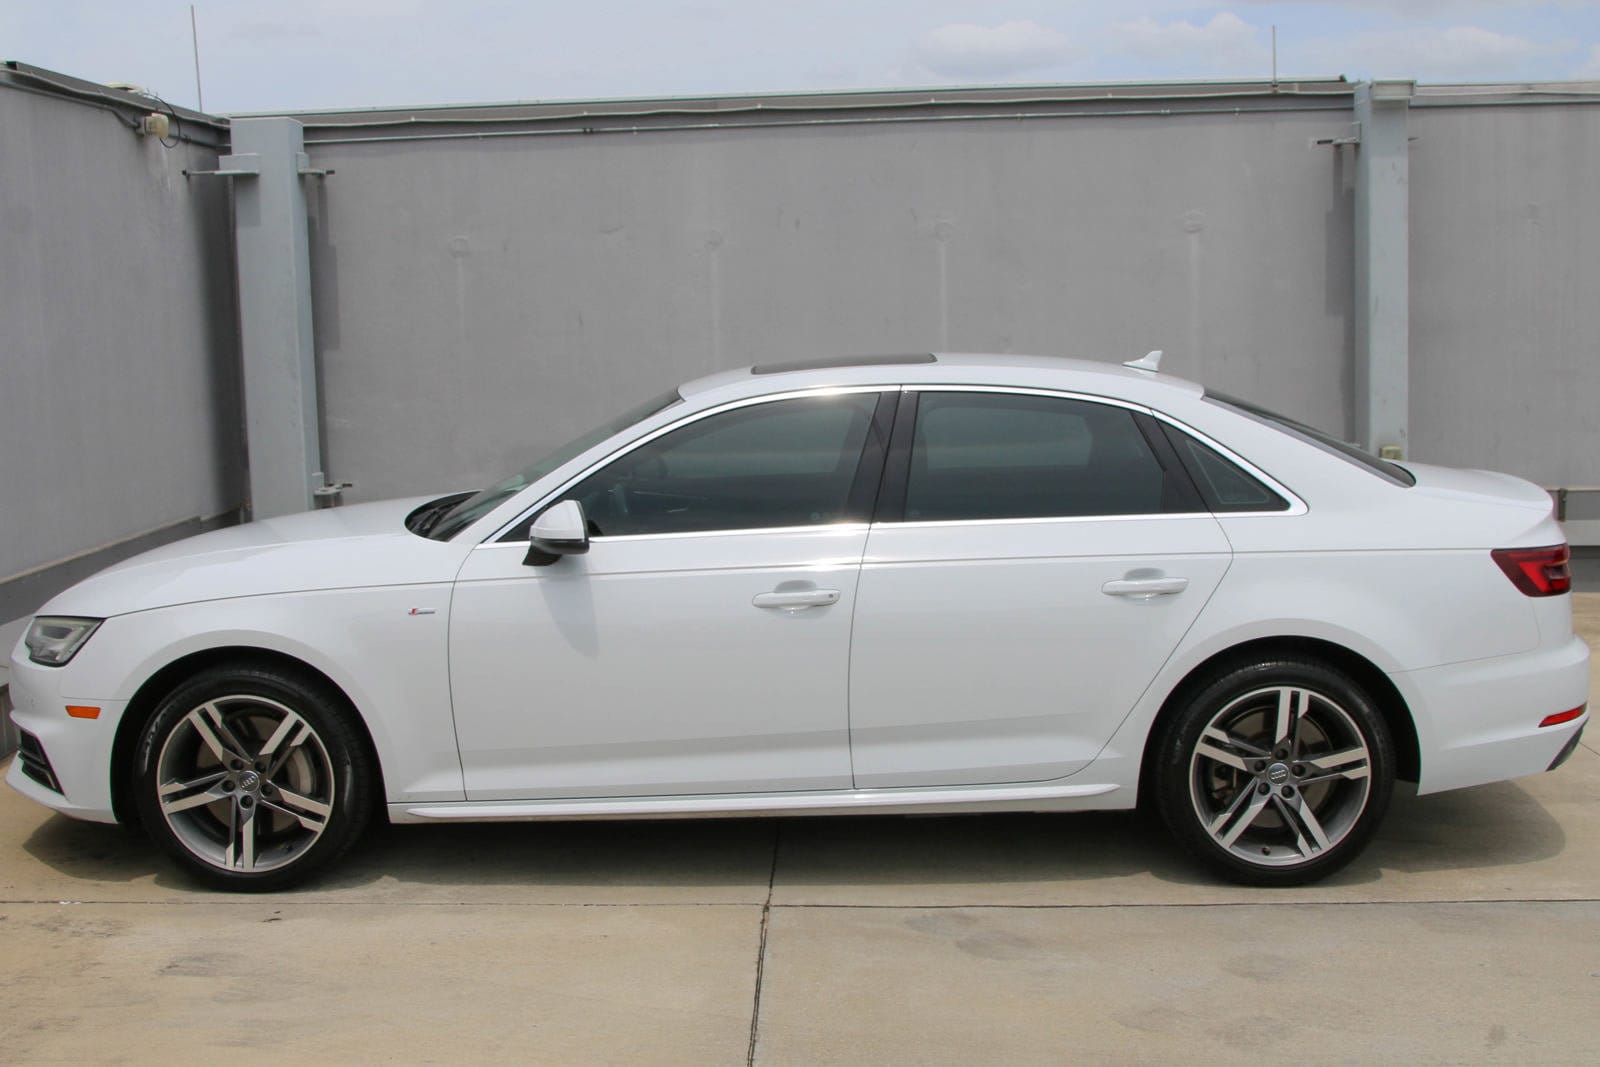 Used 2018 Audi A4 Premium Plus with VIN WAUENAF43JA042372 for sale in Sugar Land, TX